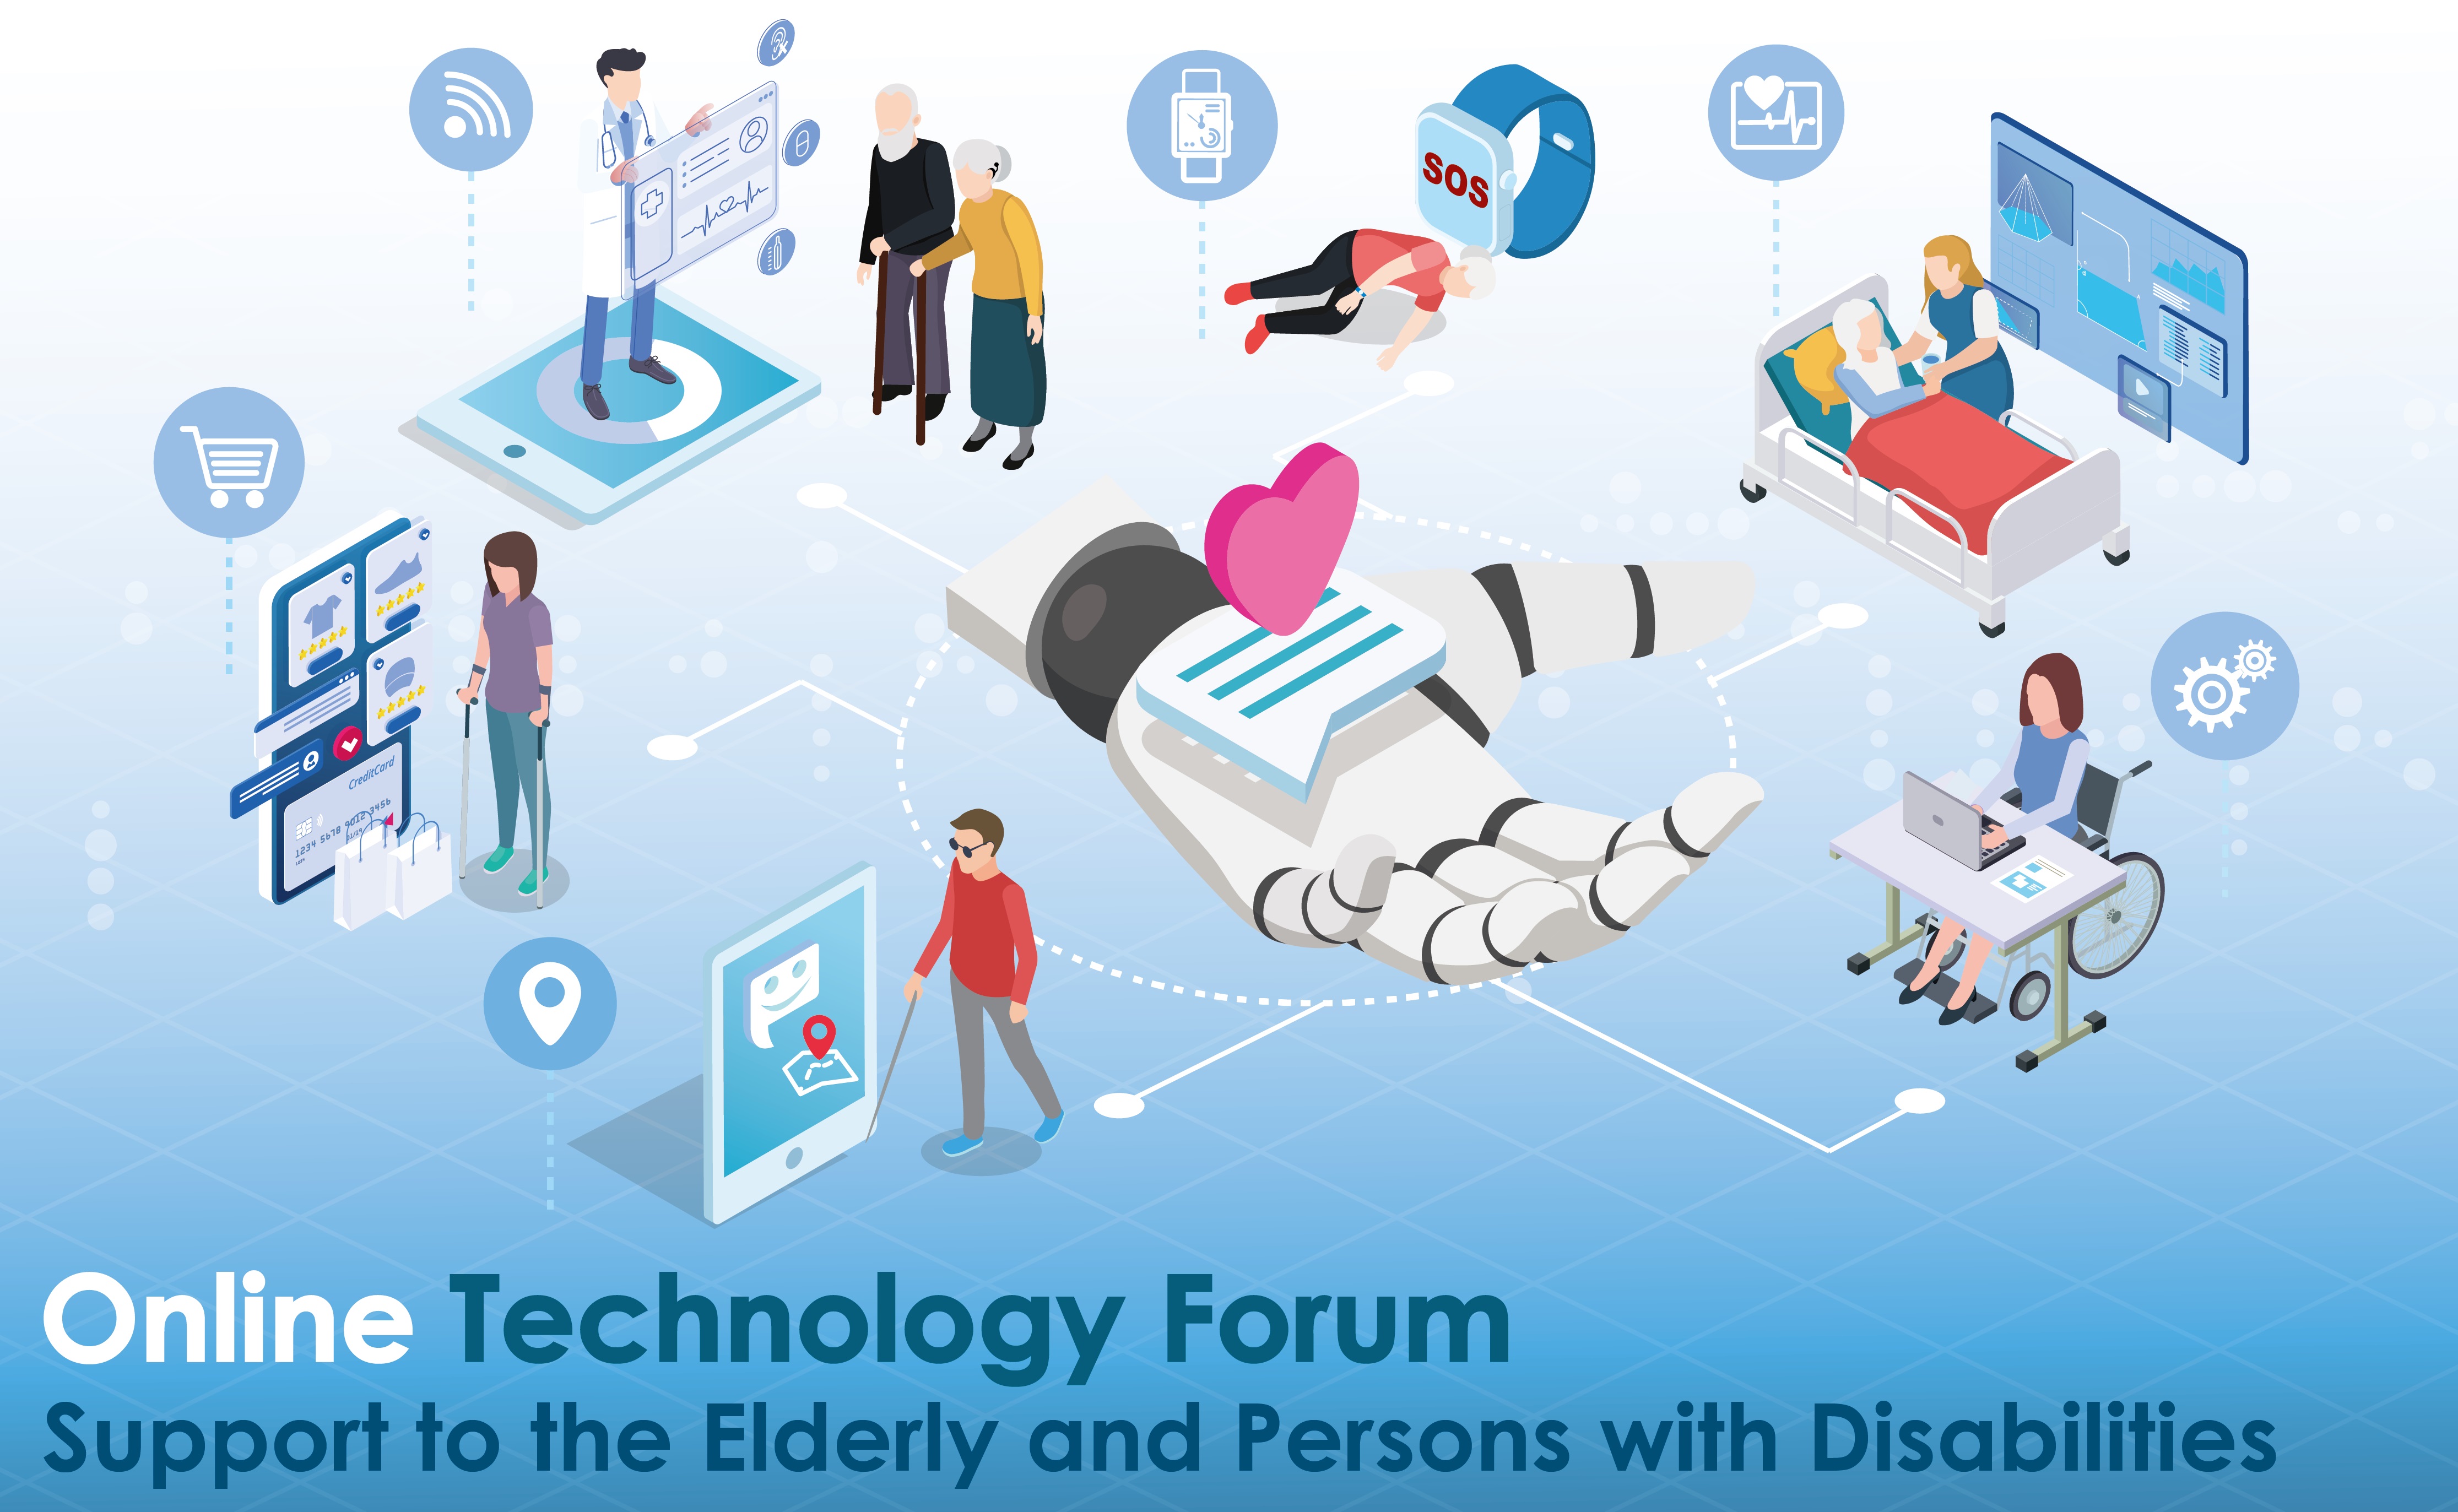 Technology Forum - Support to the Elderly and Persons with Disabilities